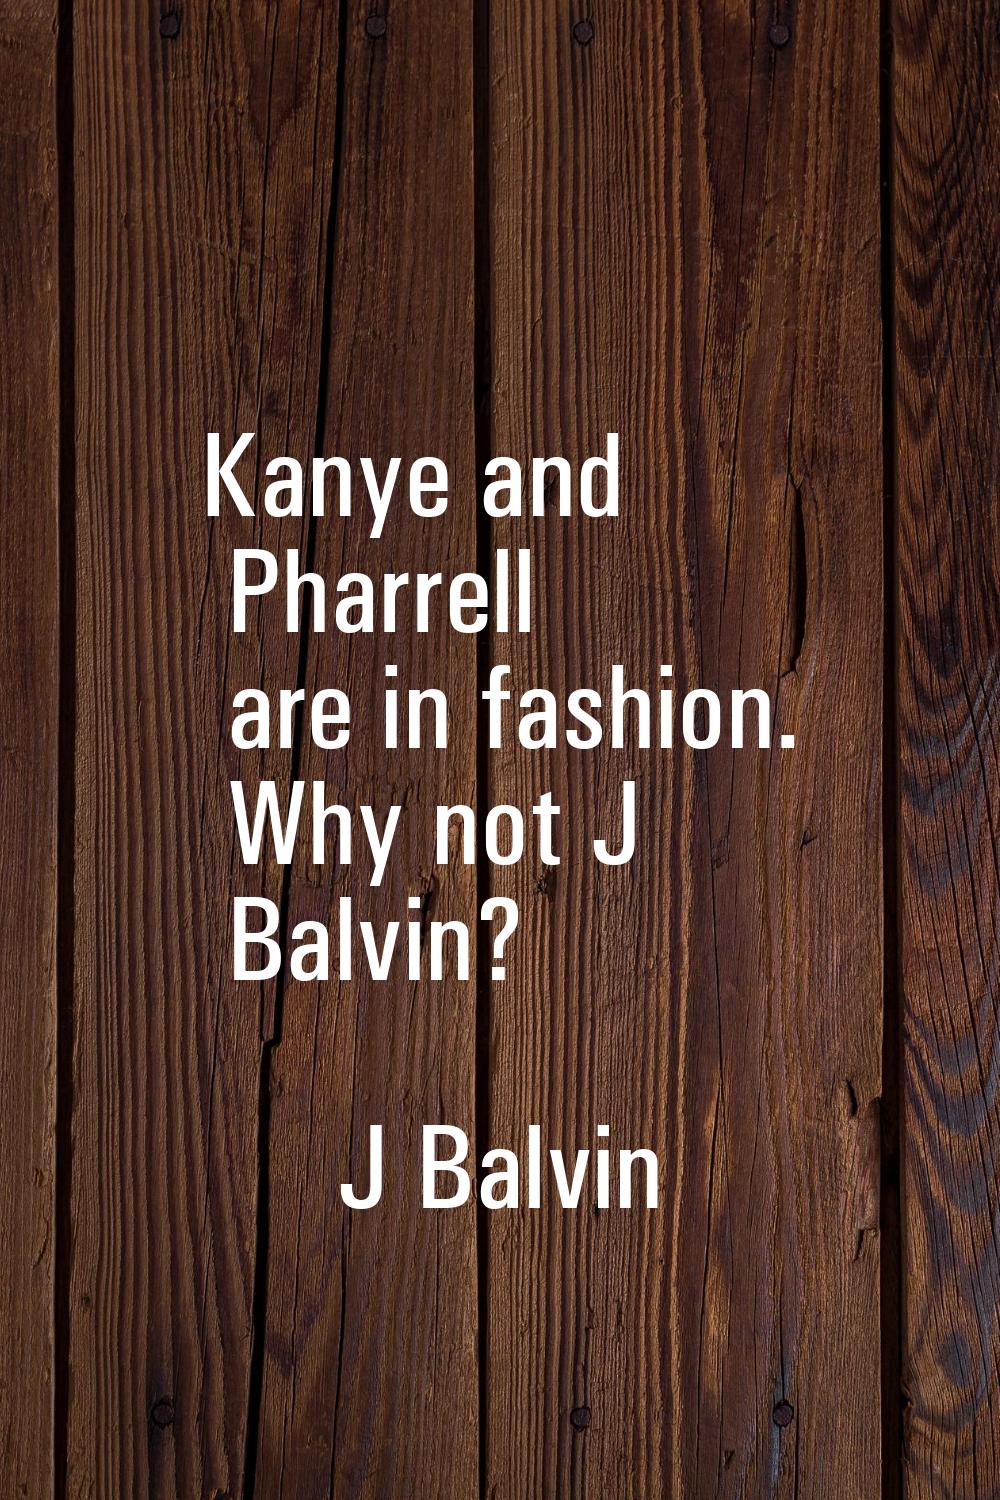 Kanye and Pharrell are in fashion. Why not J Balvin?